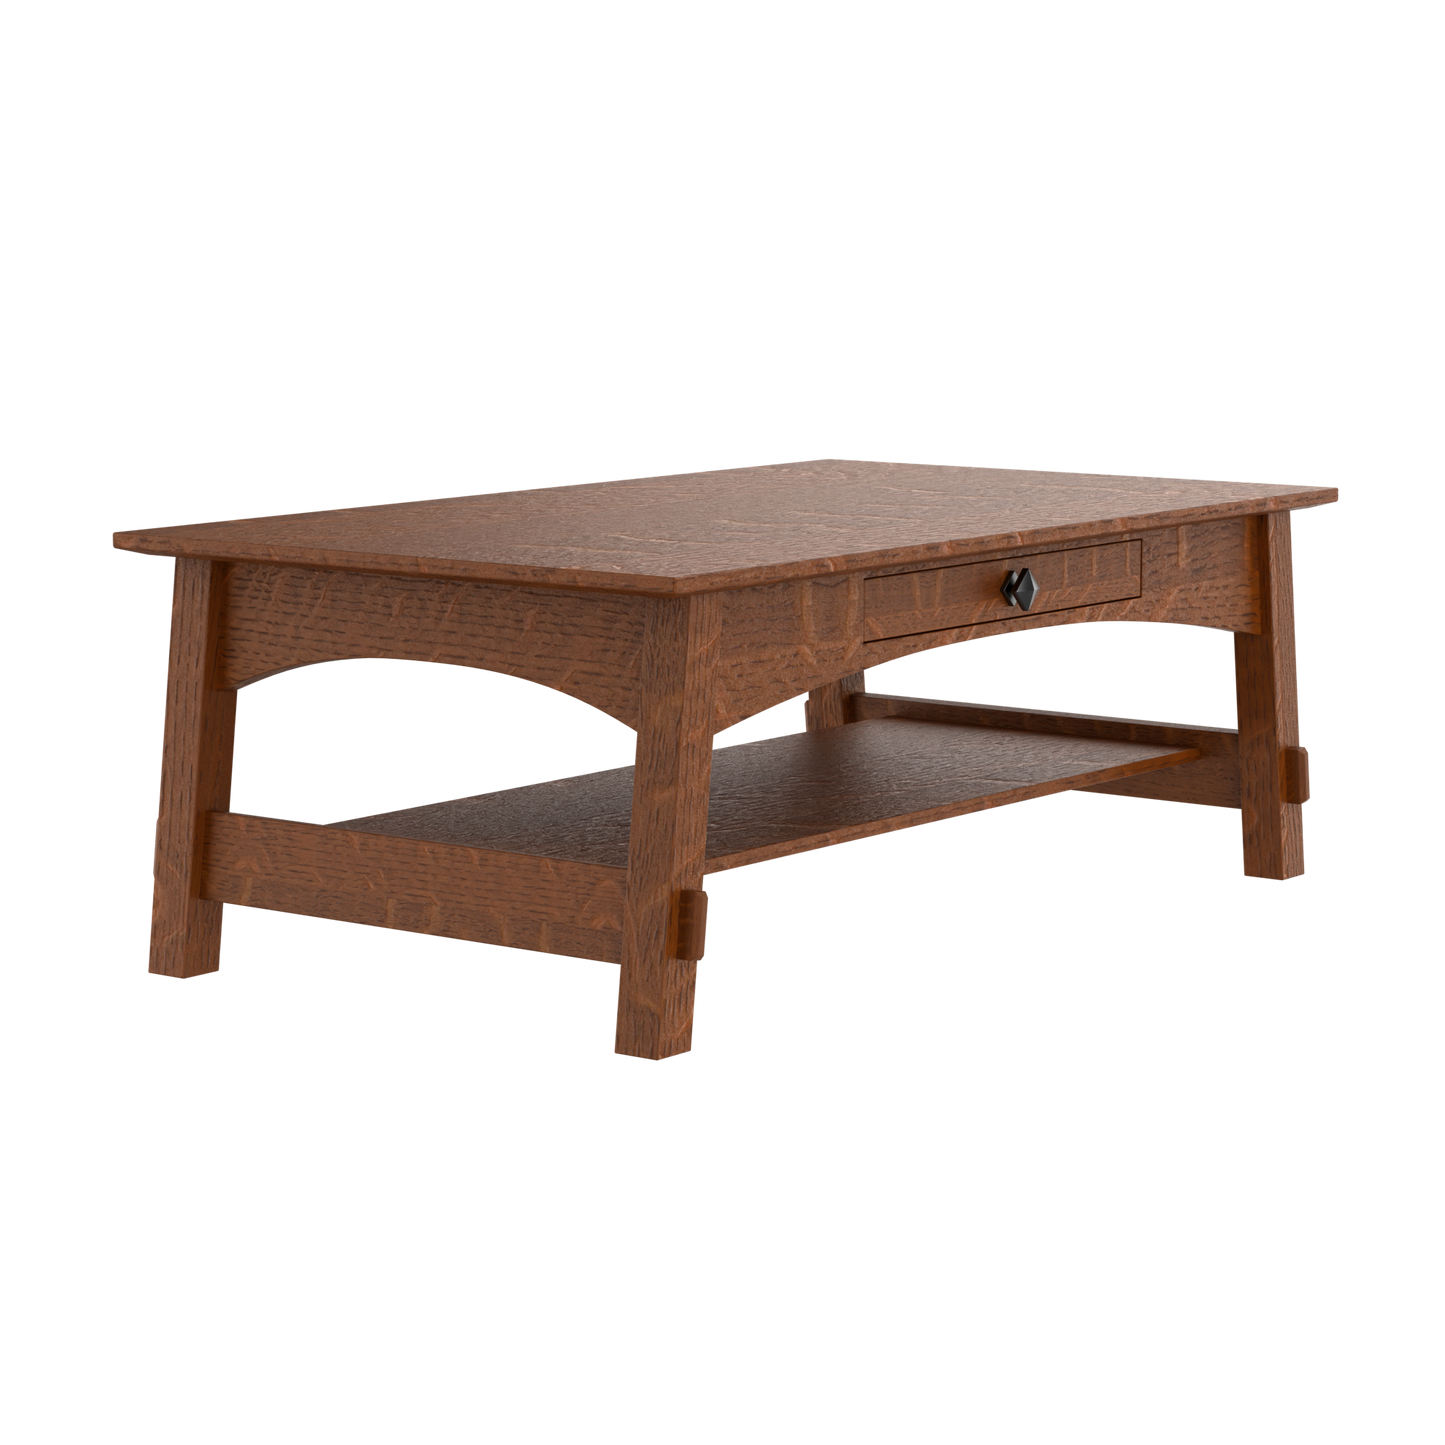 McCoy Craftsman Coffee Table with Drawer